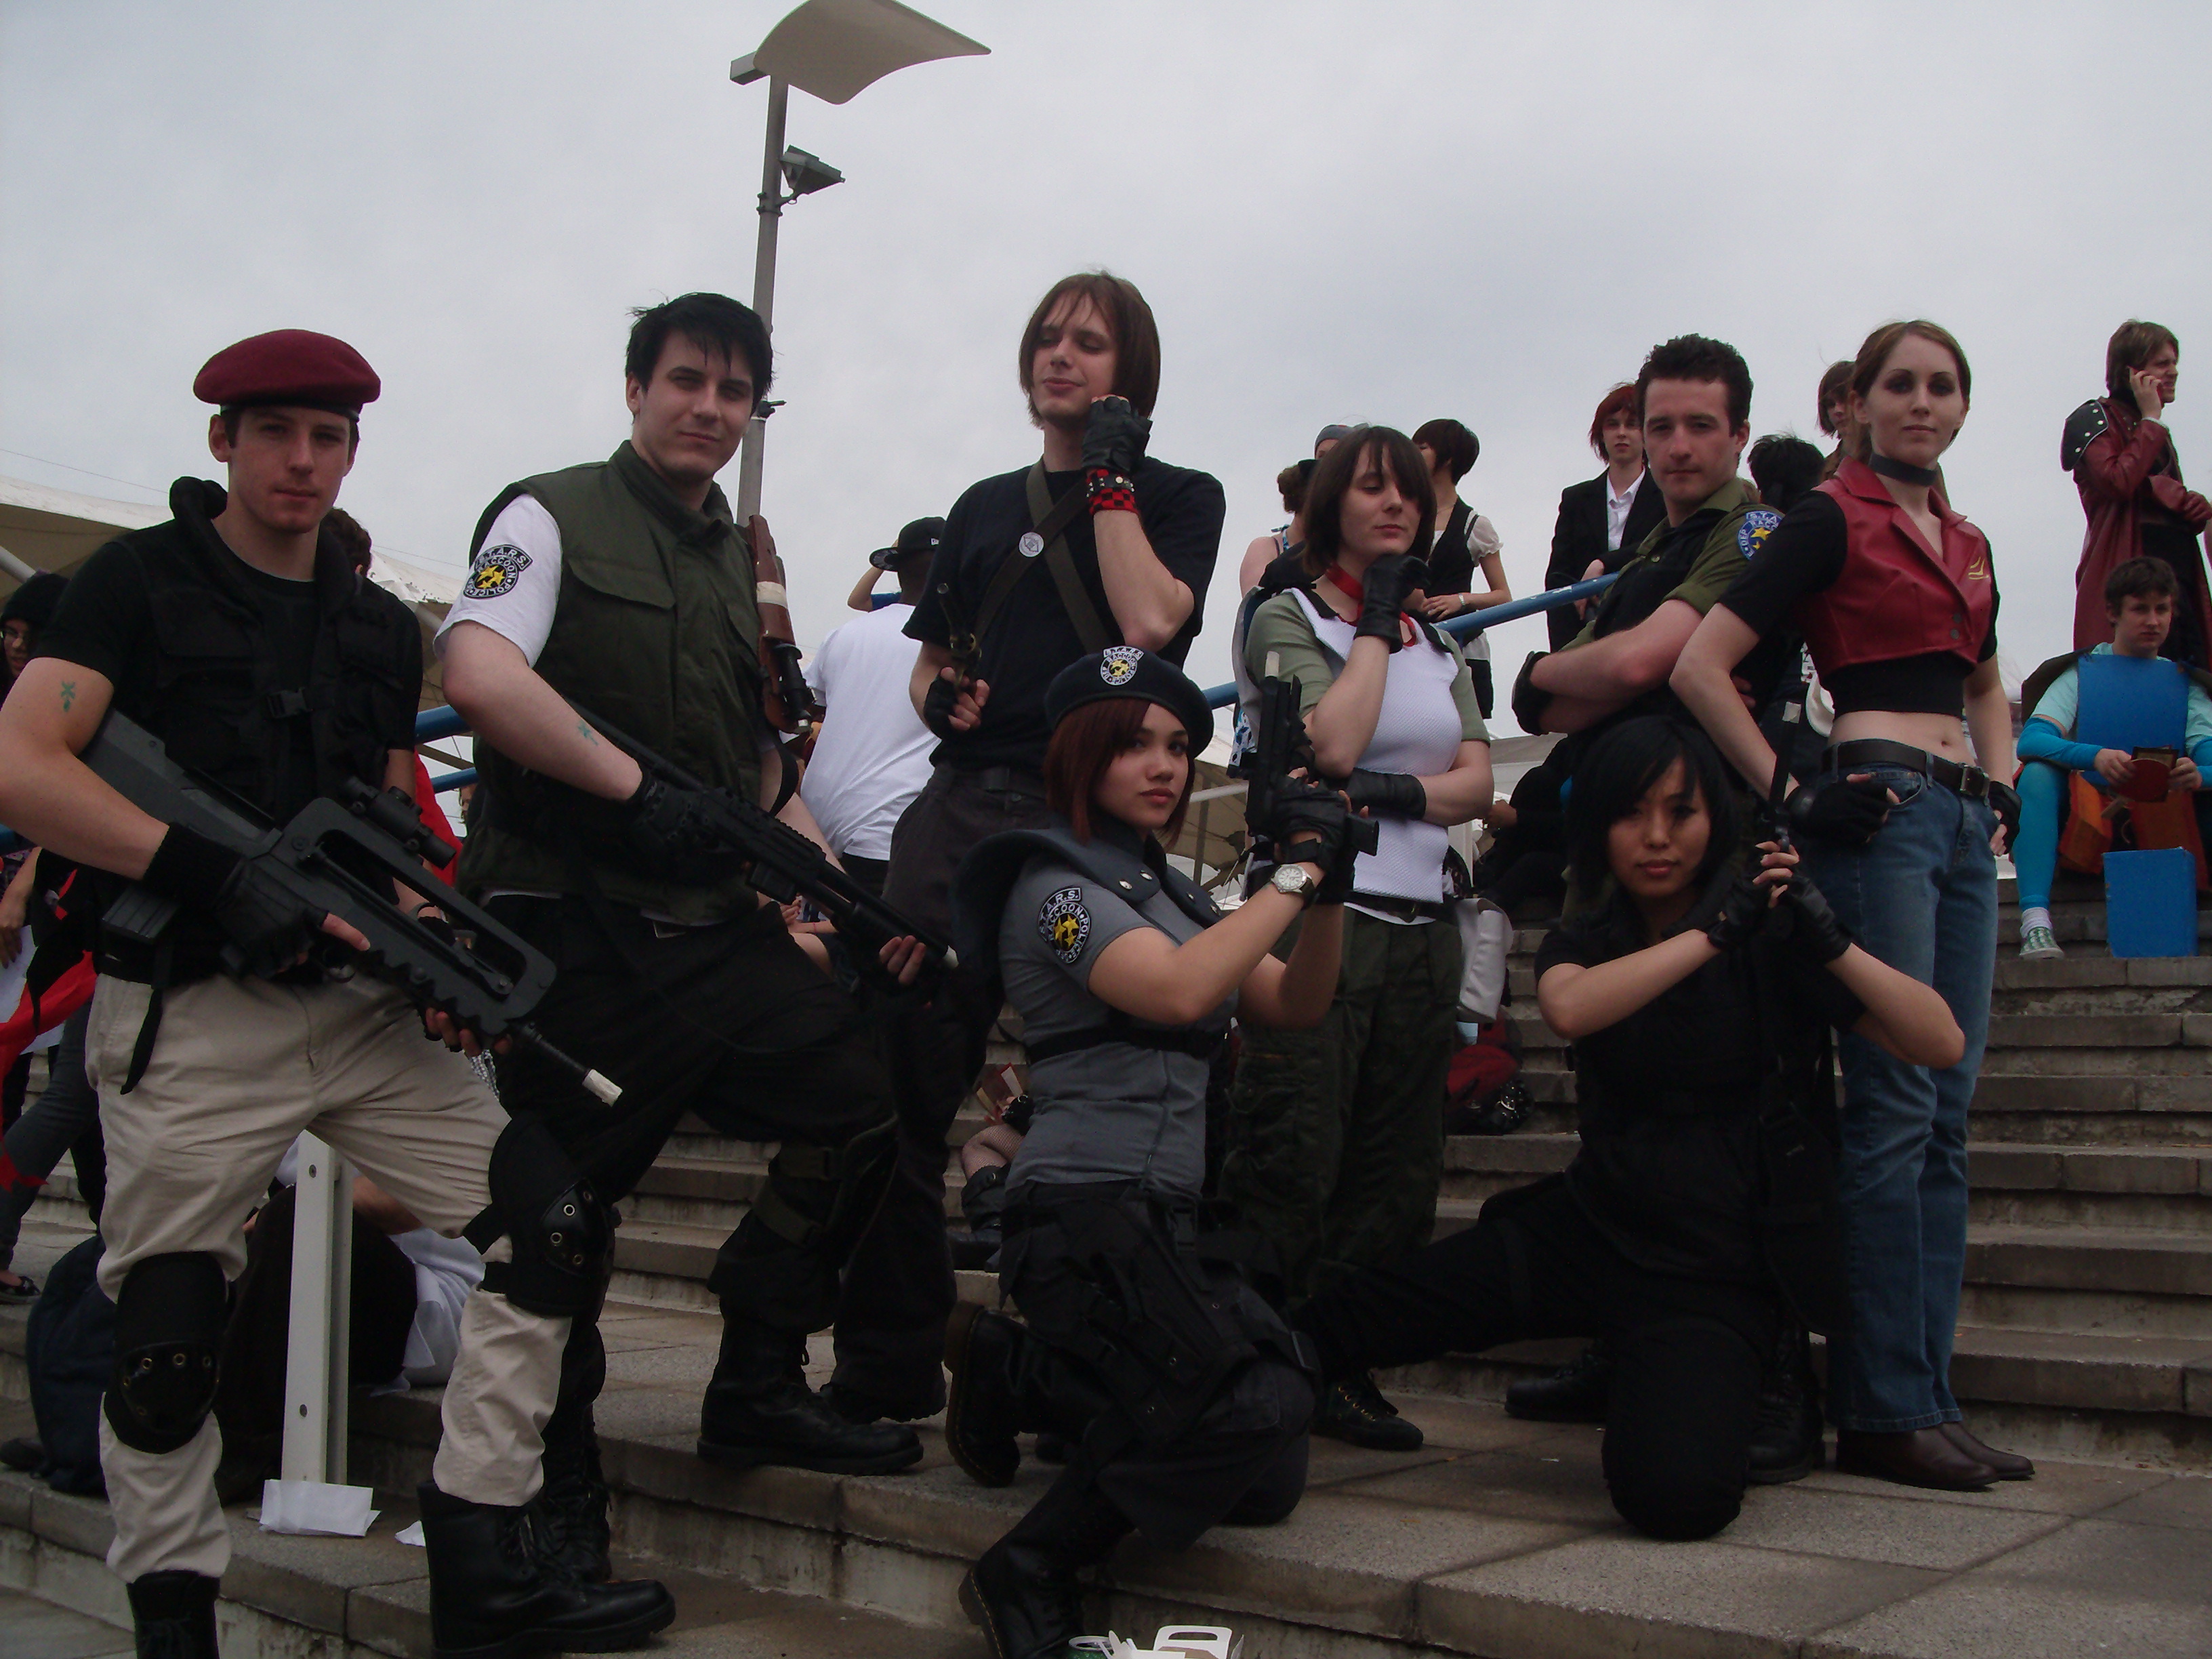 Resident_Evil_Group_cosplay_by_Miko_the_moogle.jpg